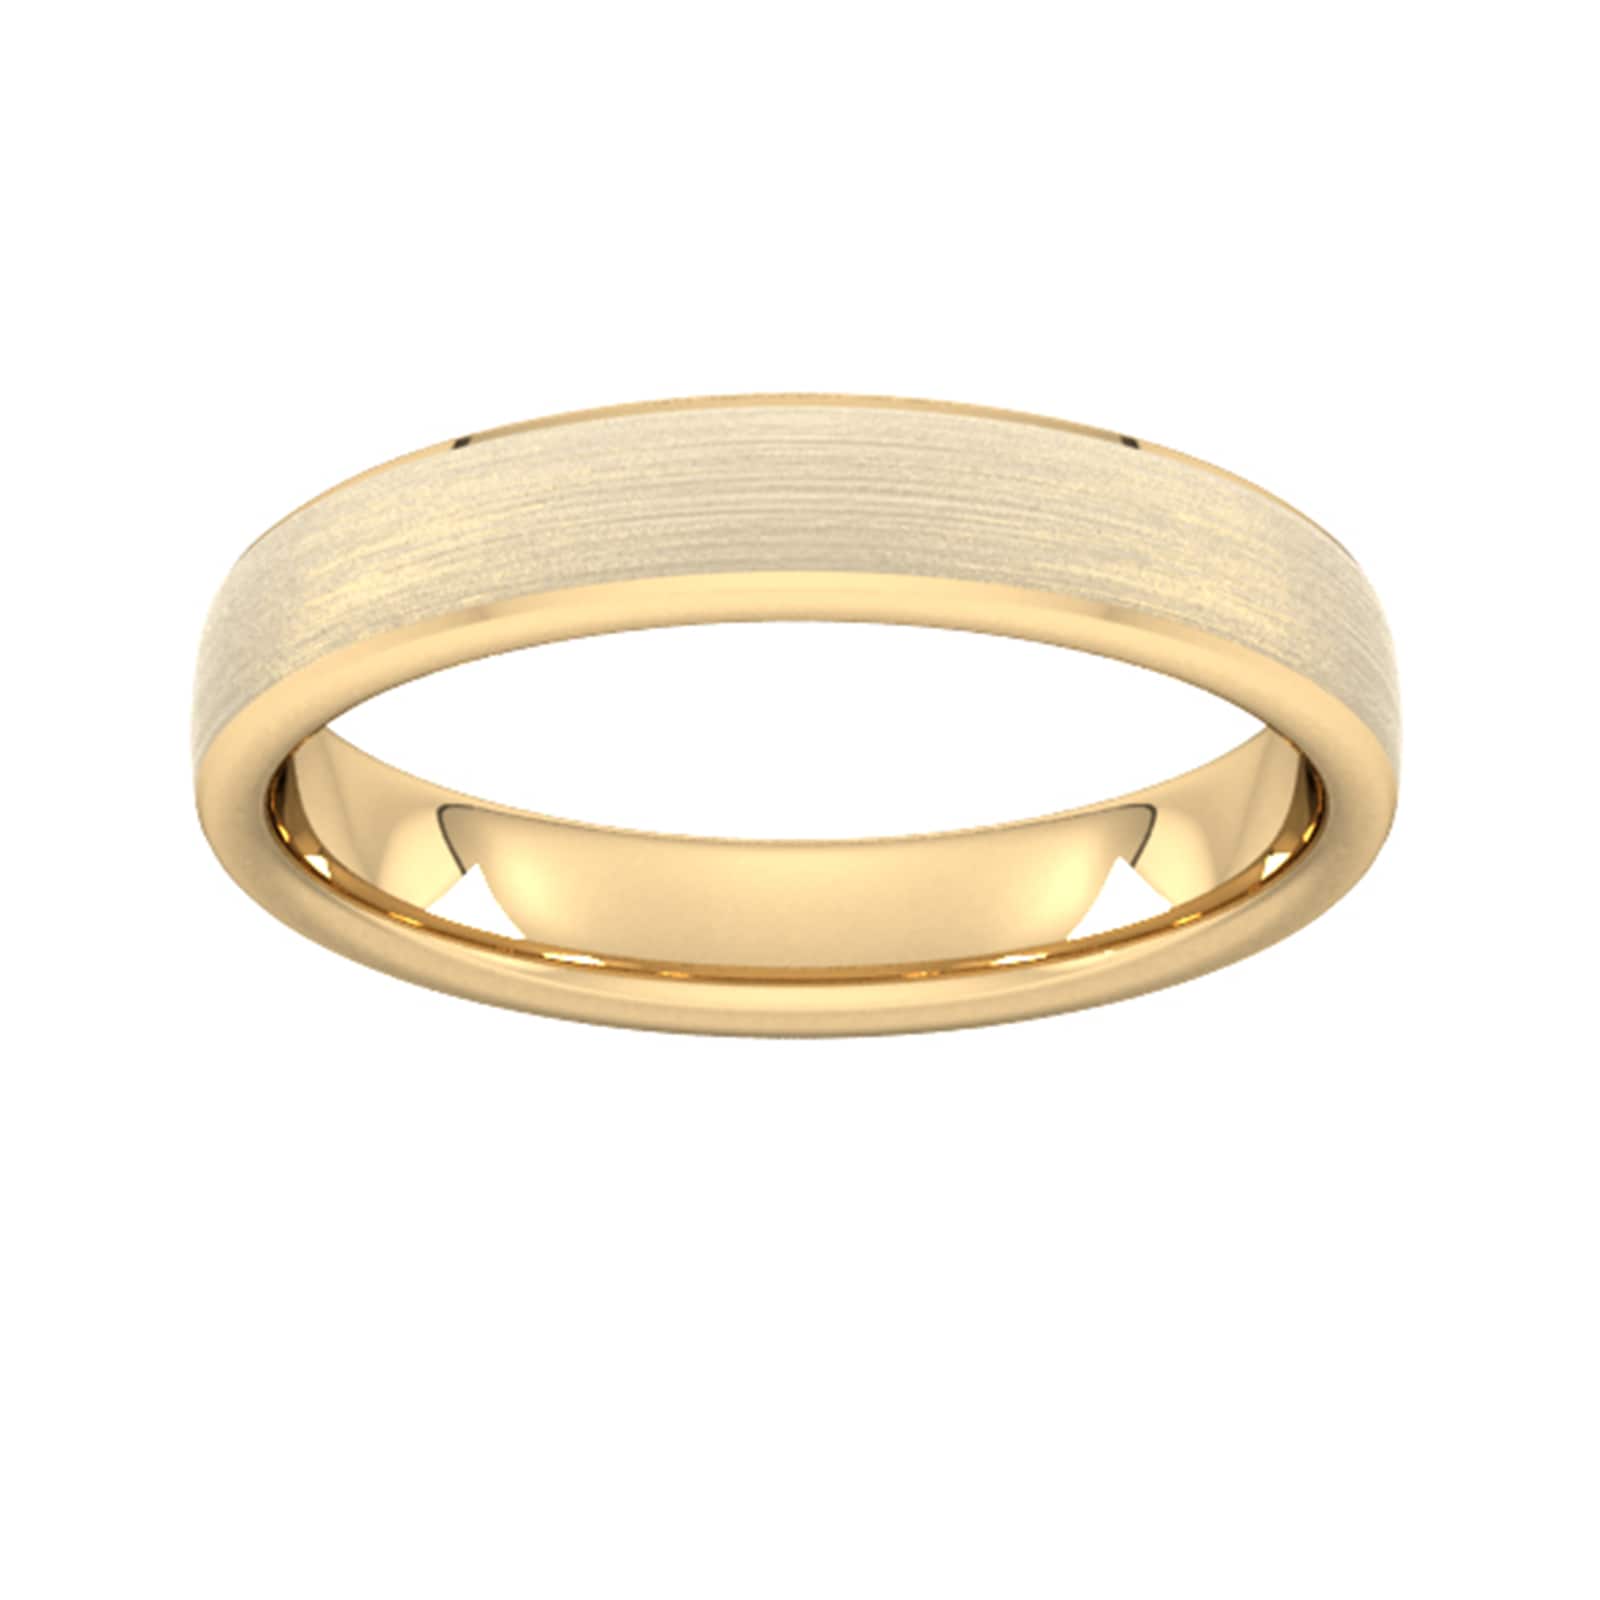 4mm Slight Court Standard Polished Chamfered Edges With Matt Centre Wedding Ring In 9 Carat Yellow Gold - Ring Size Q